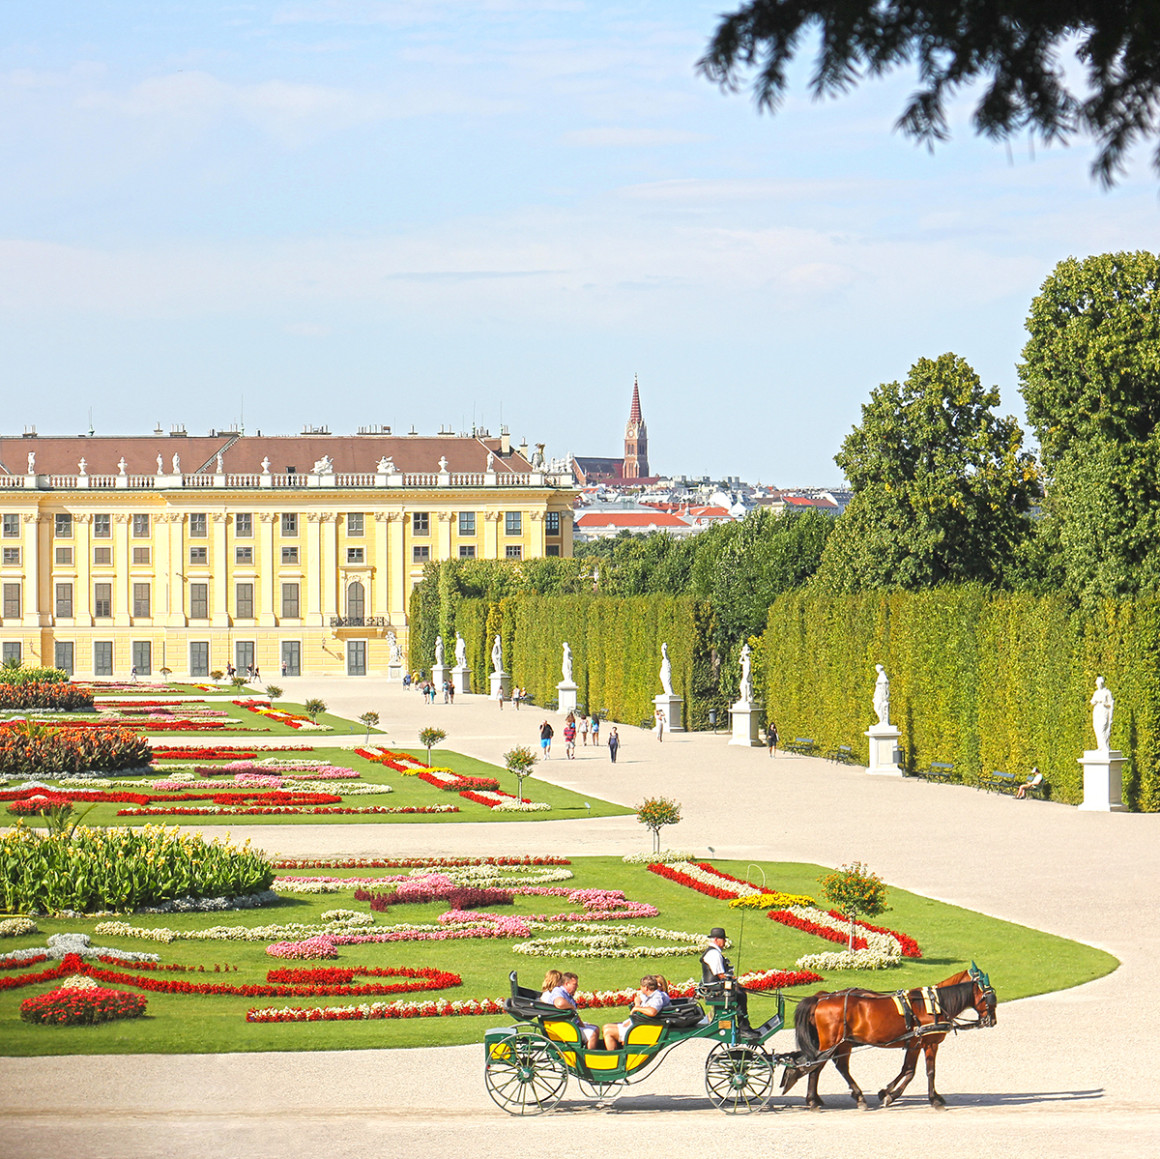 Schonbrunn Palace in Vienna. A blog about getting the train from Budapest - Bratislava - Vienna.